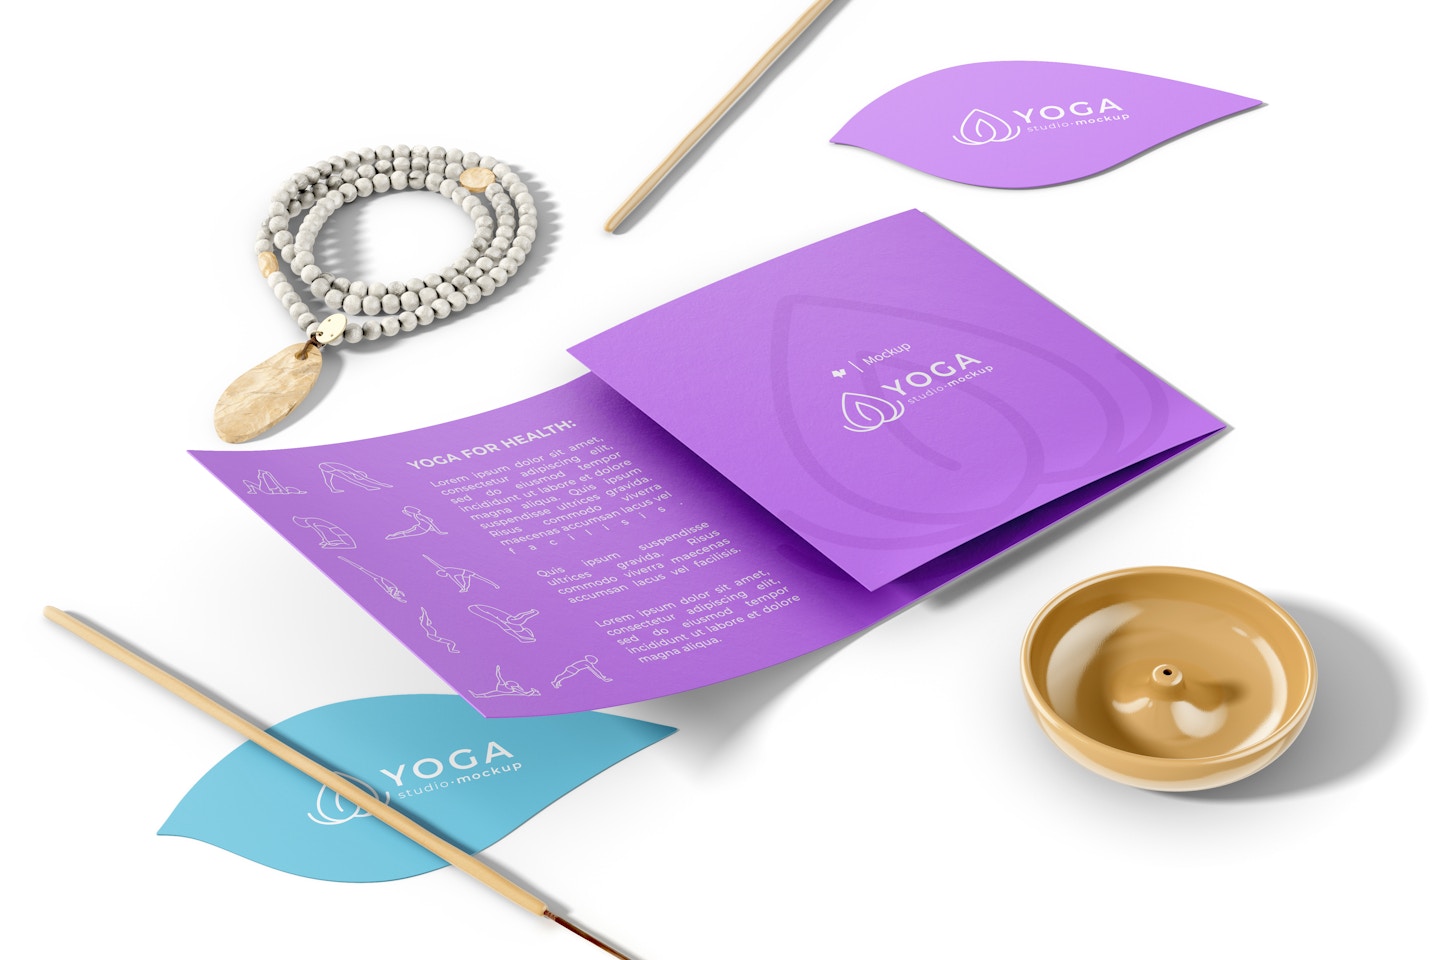 Yoga Studio Supplies with Stationery Mockup, Perspective